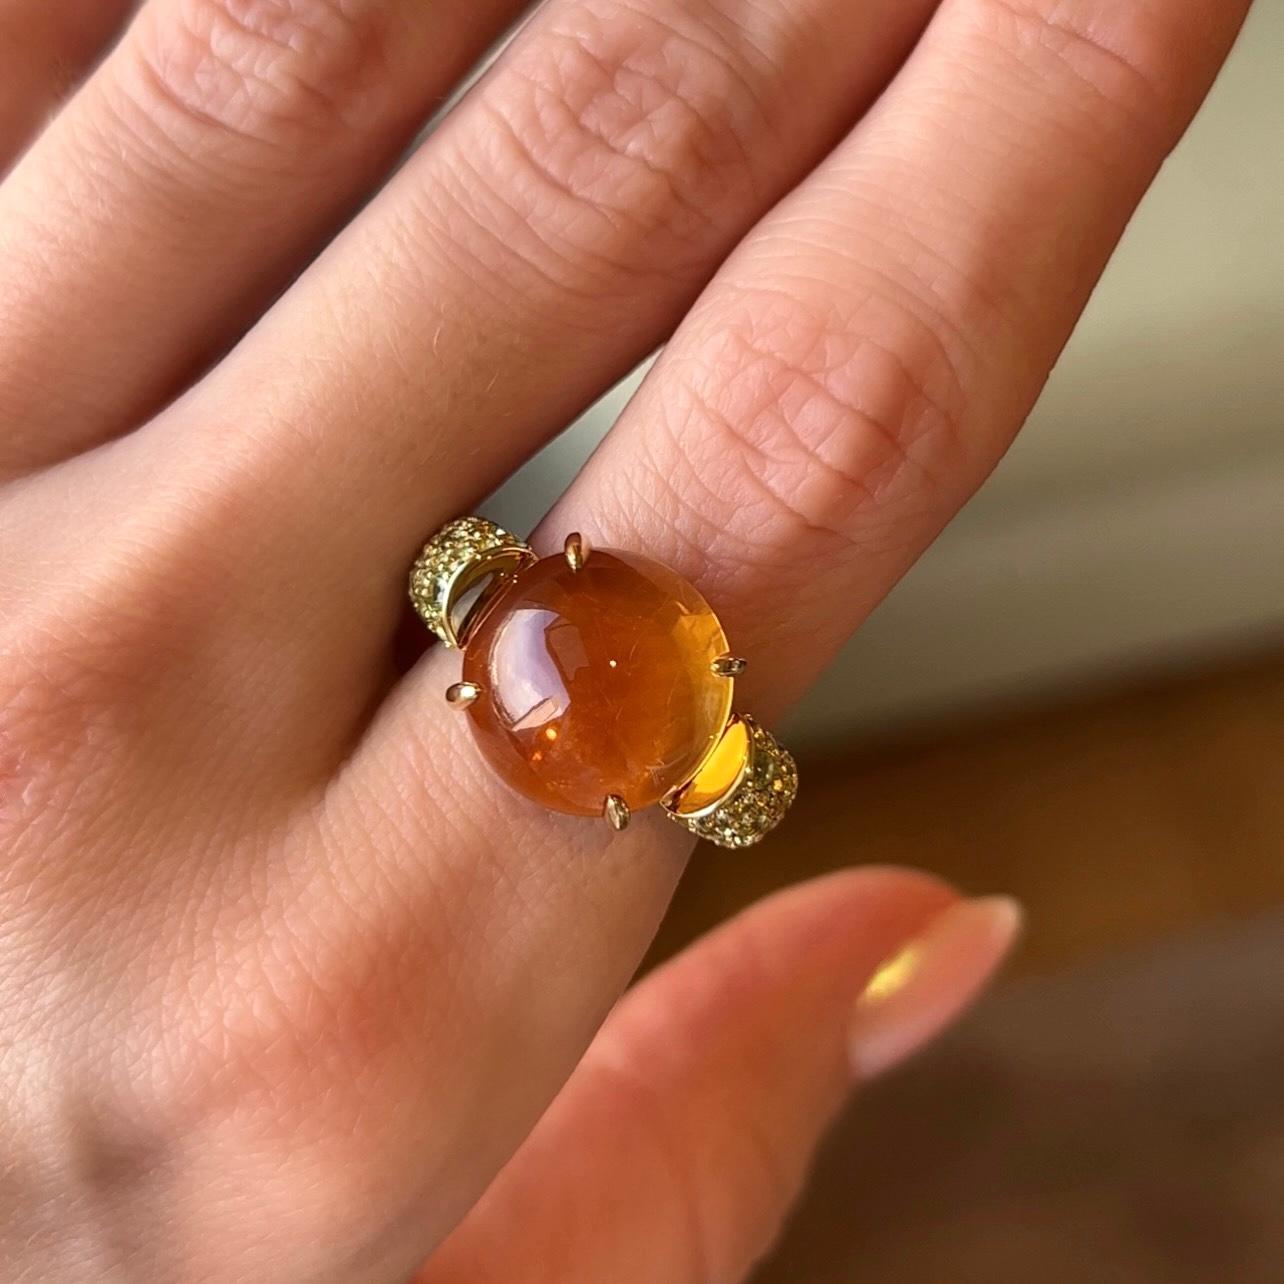 Not a ring, but a candy, not a candy, but a ring
Citrine in this ring is so bright, intense in color and nice looking, that it is looking like a real candy
We used citrine cabochon form here to make it more attractive and 